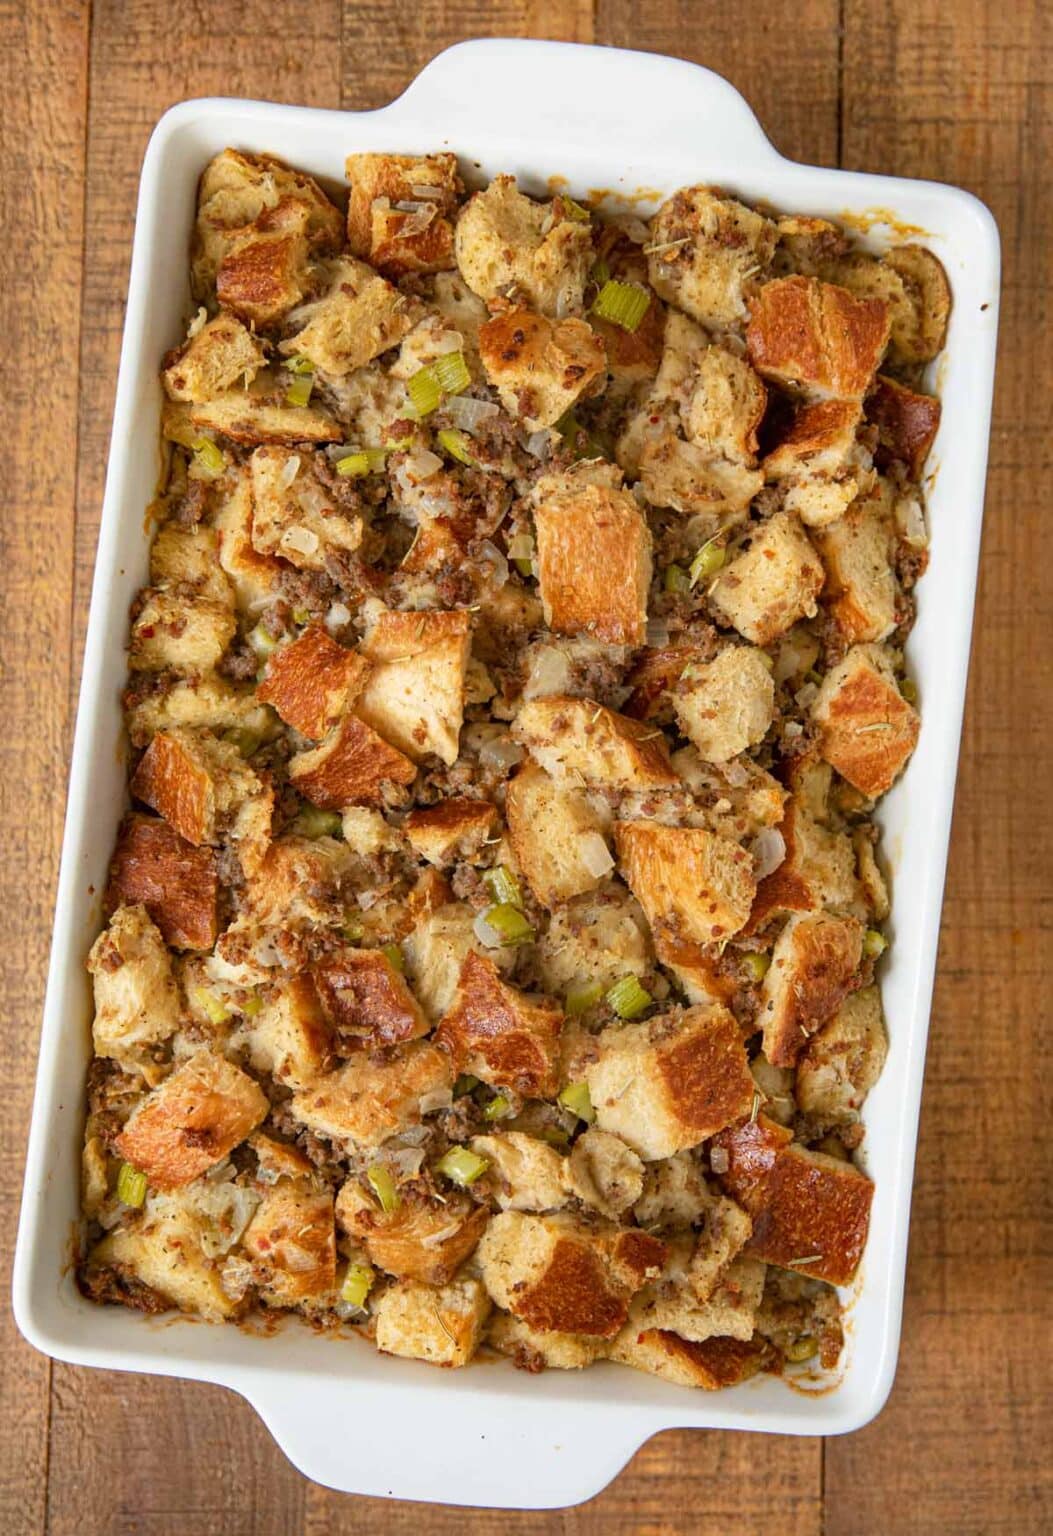 Sausage and Herb Stuffing Recipe [VIDEO] - Dinner, then Dessert